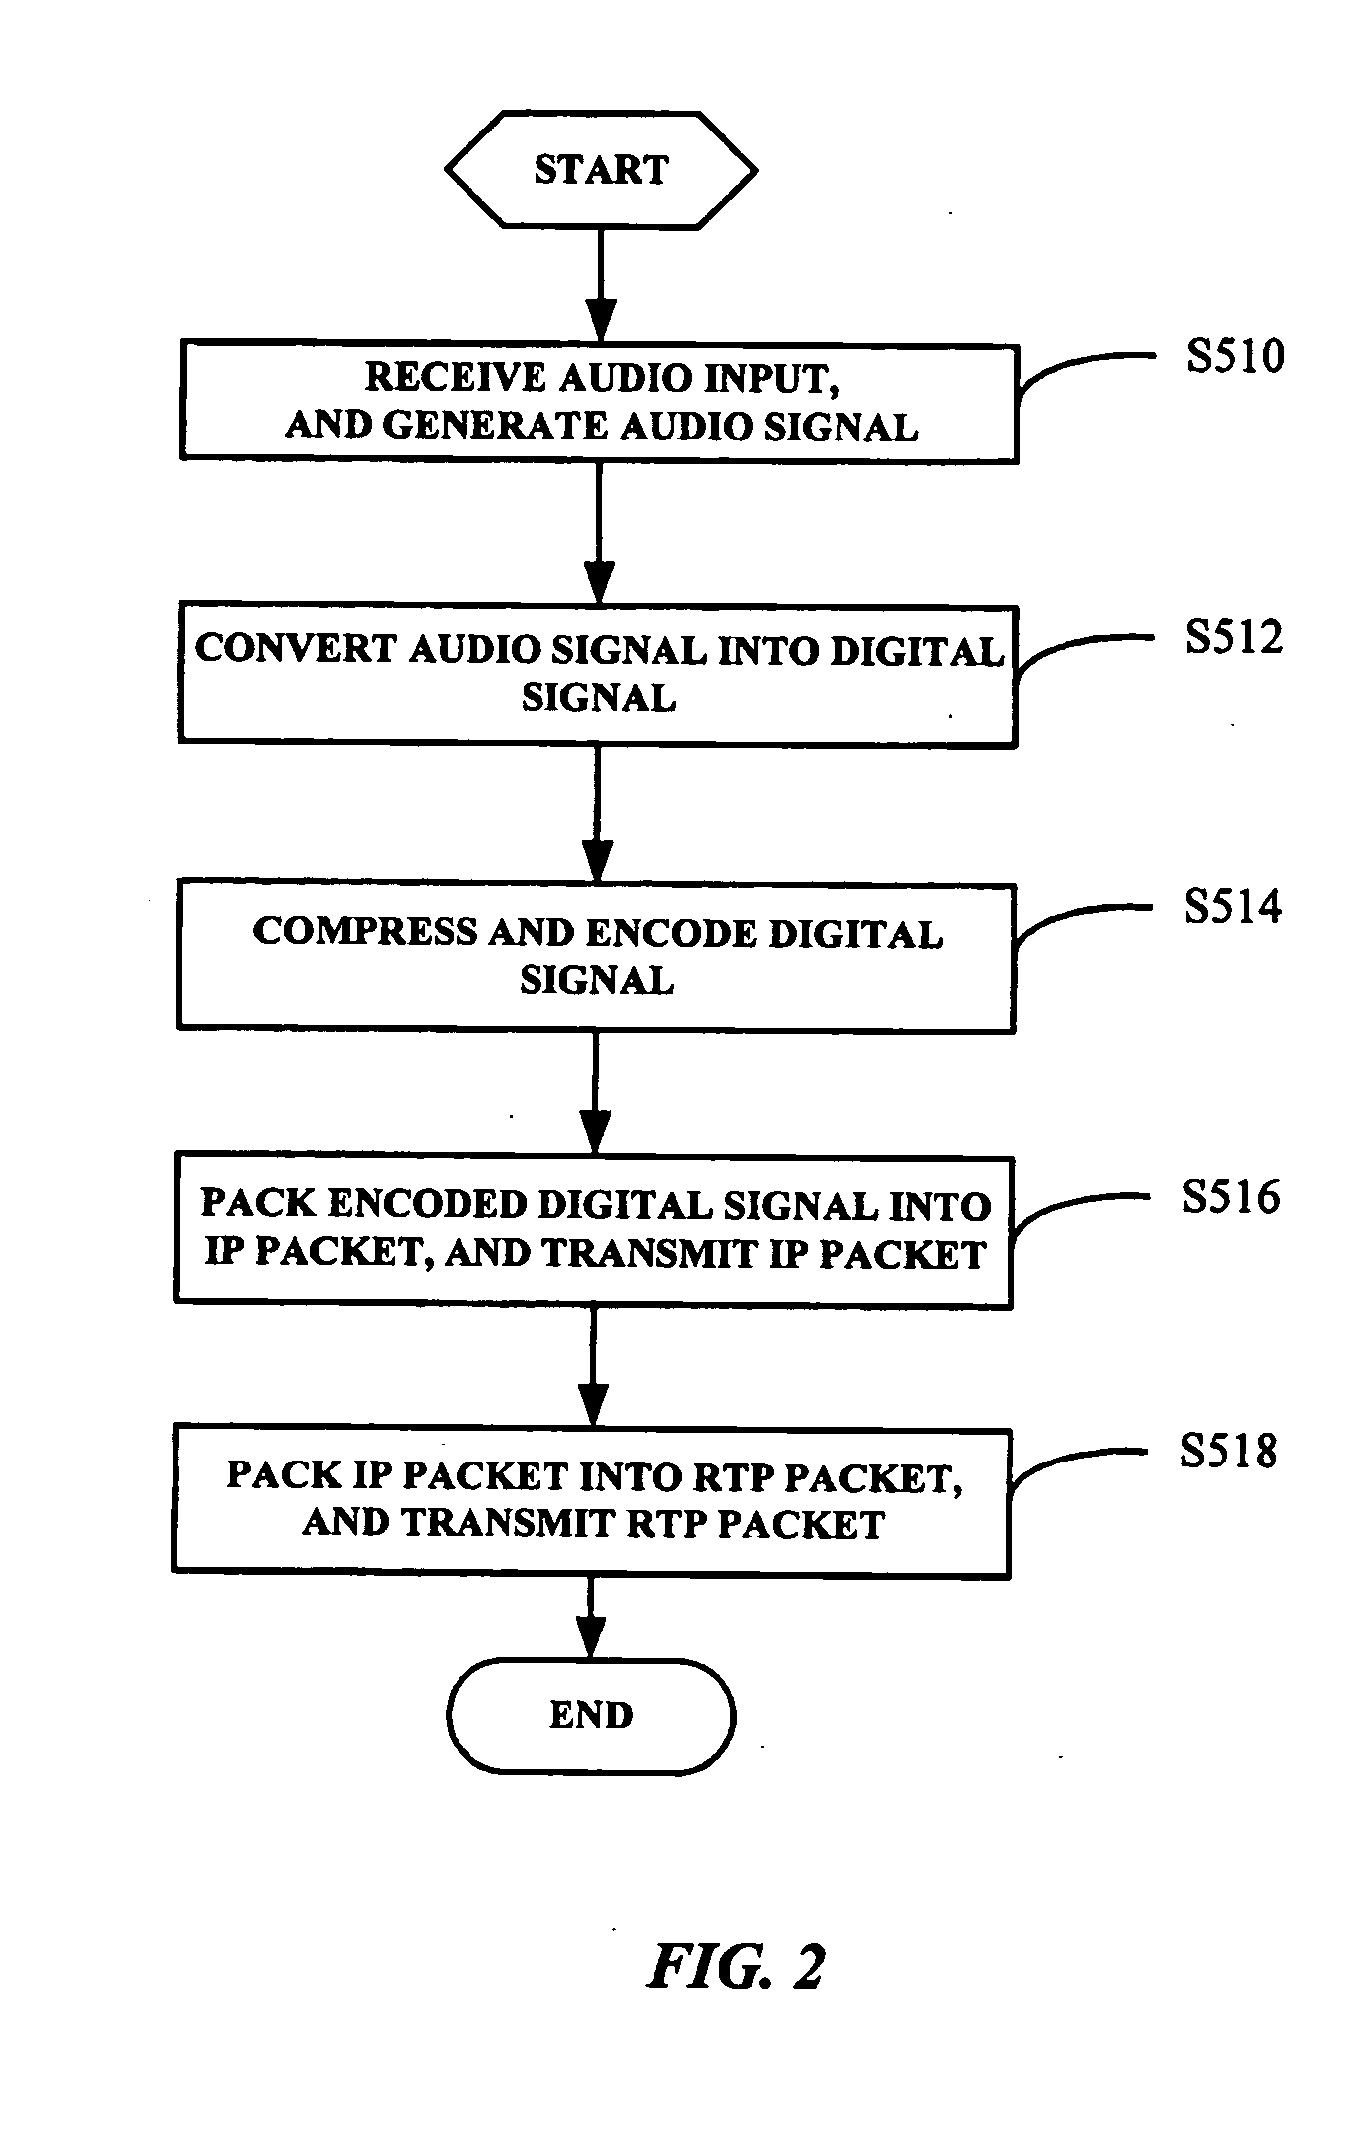 Network telephony system with enhanced interconversion of audio signals and IP packets